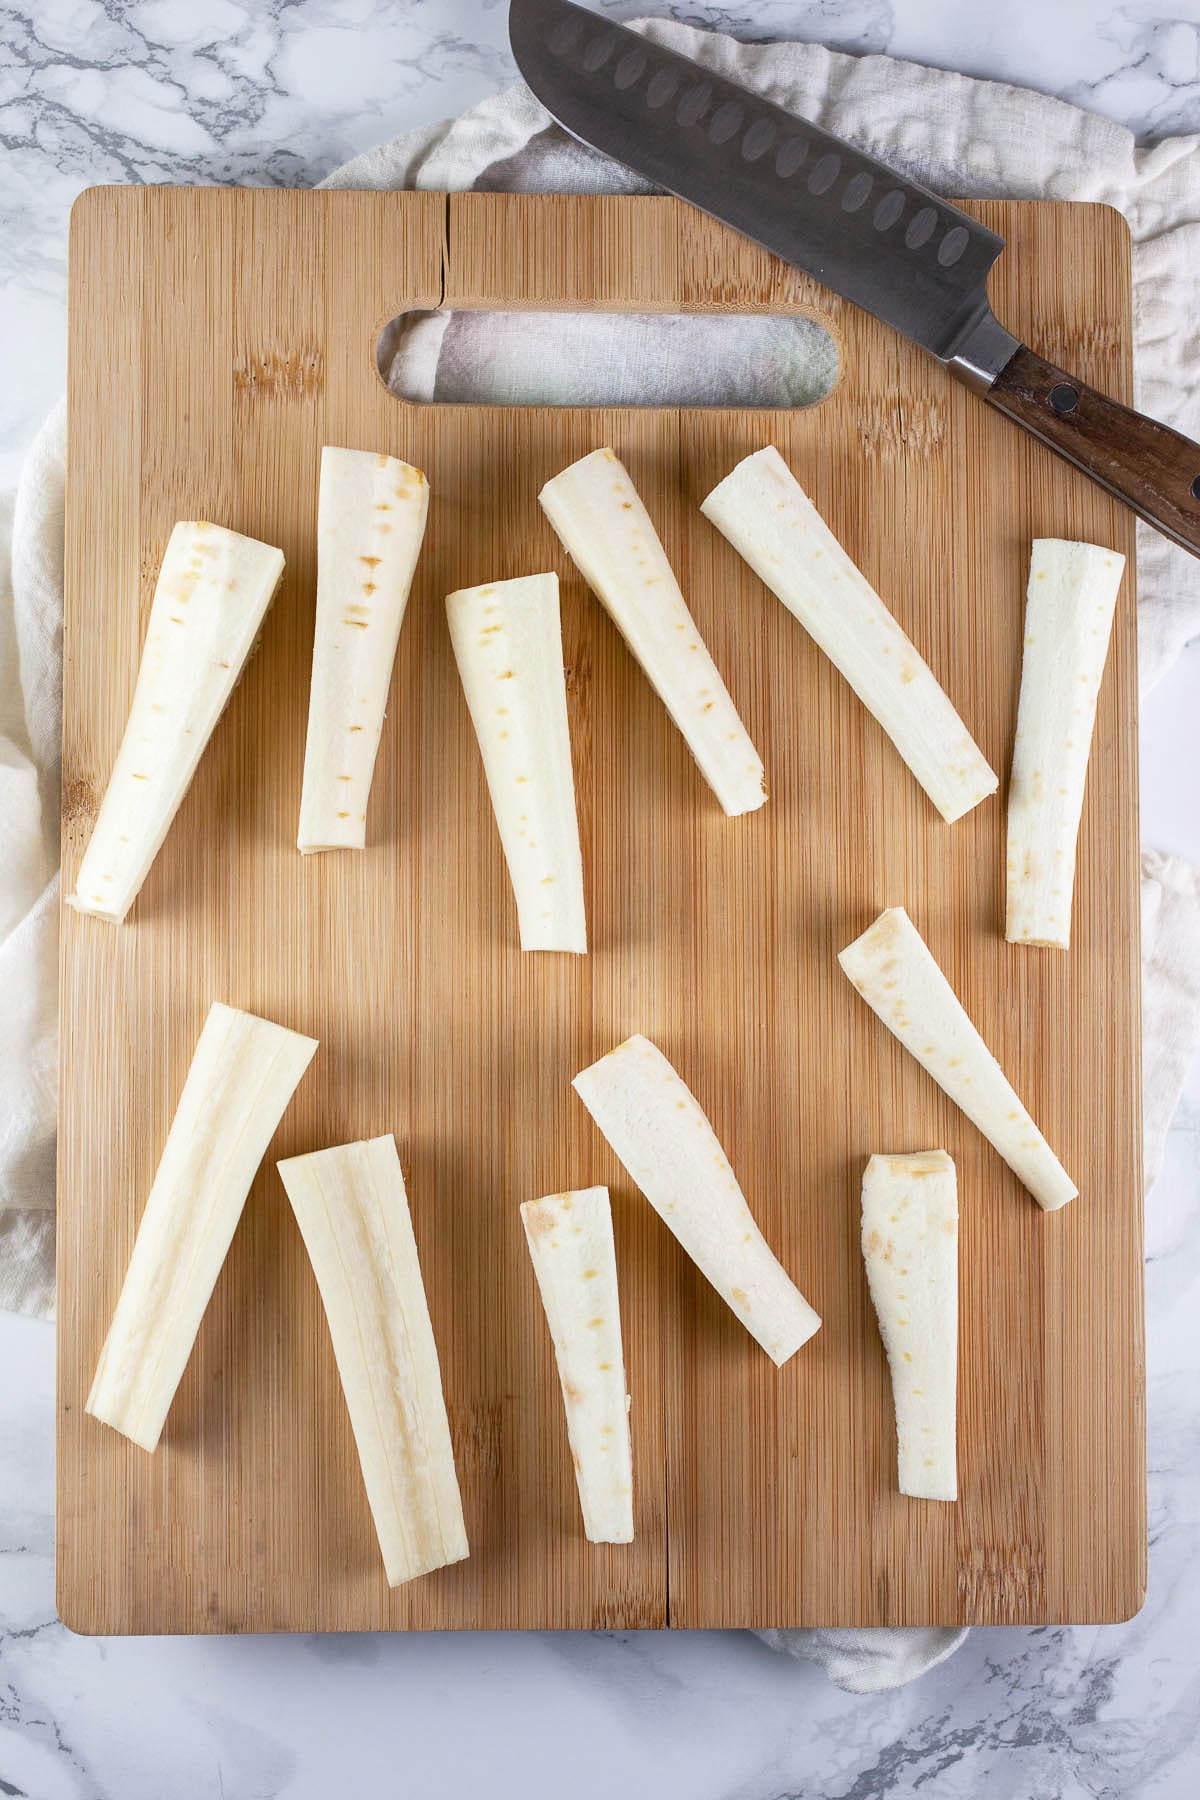 Parsnips cut into strips on wooden cutting board with knife.